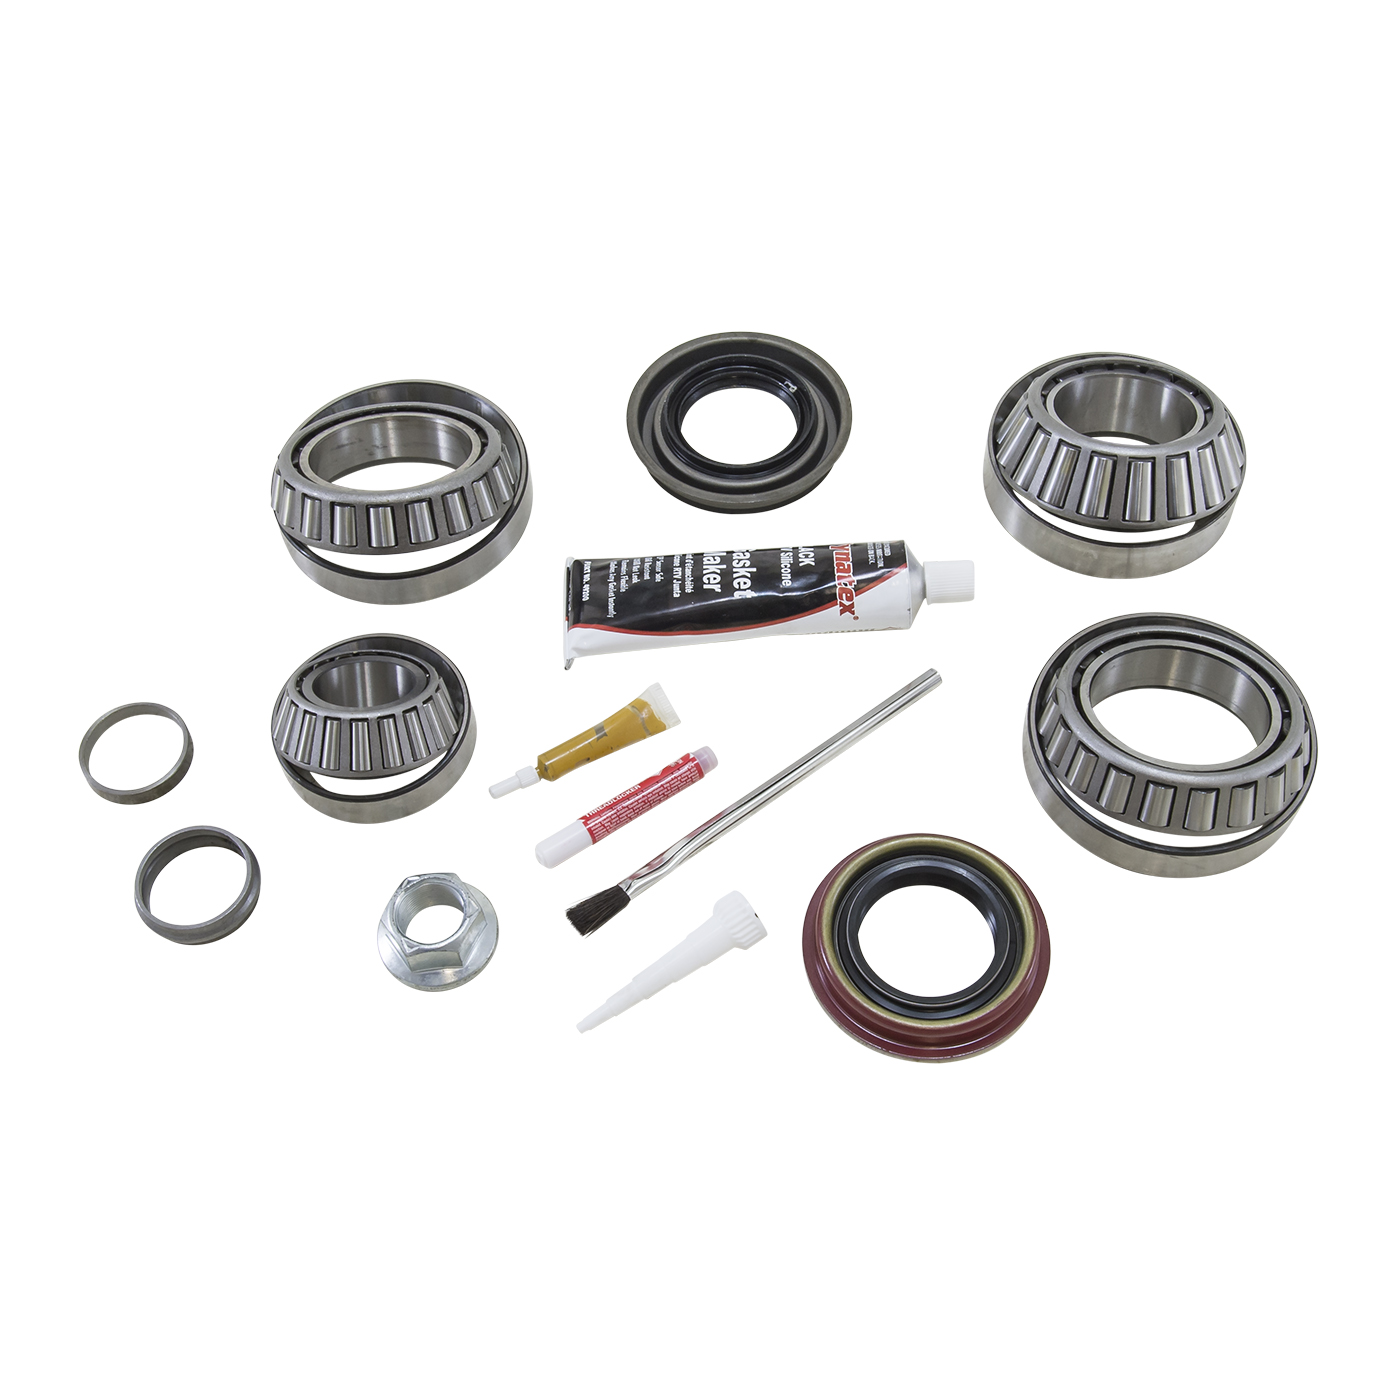 USA Standard Bearing kit for '08-'10 Ford 10.5" with OEM ring & pinion set